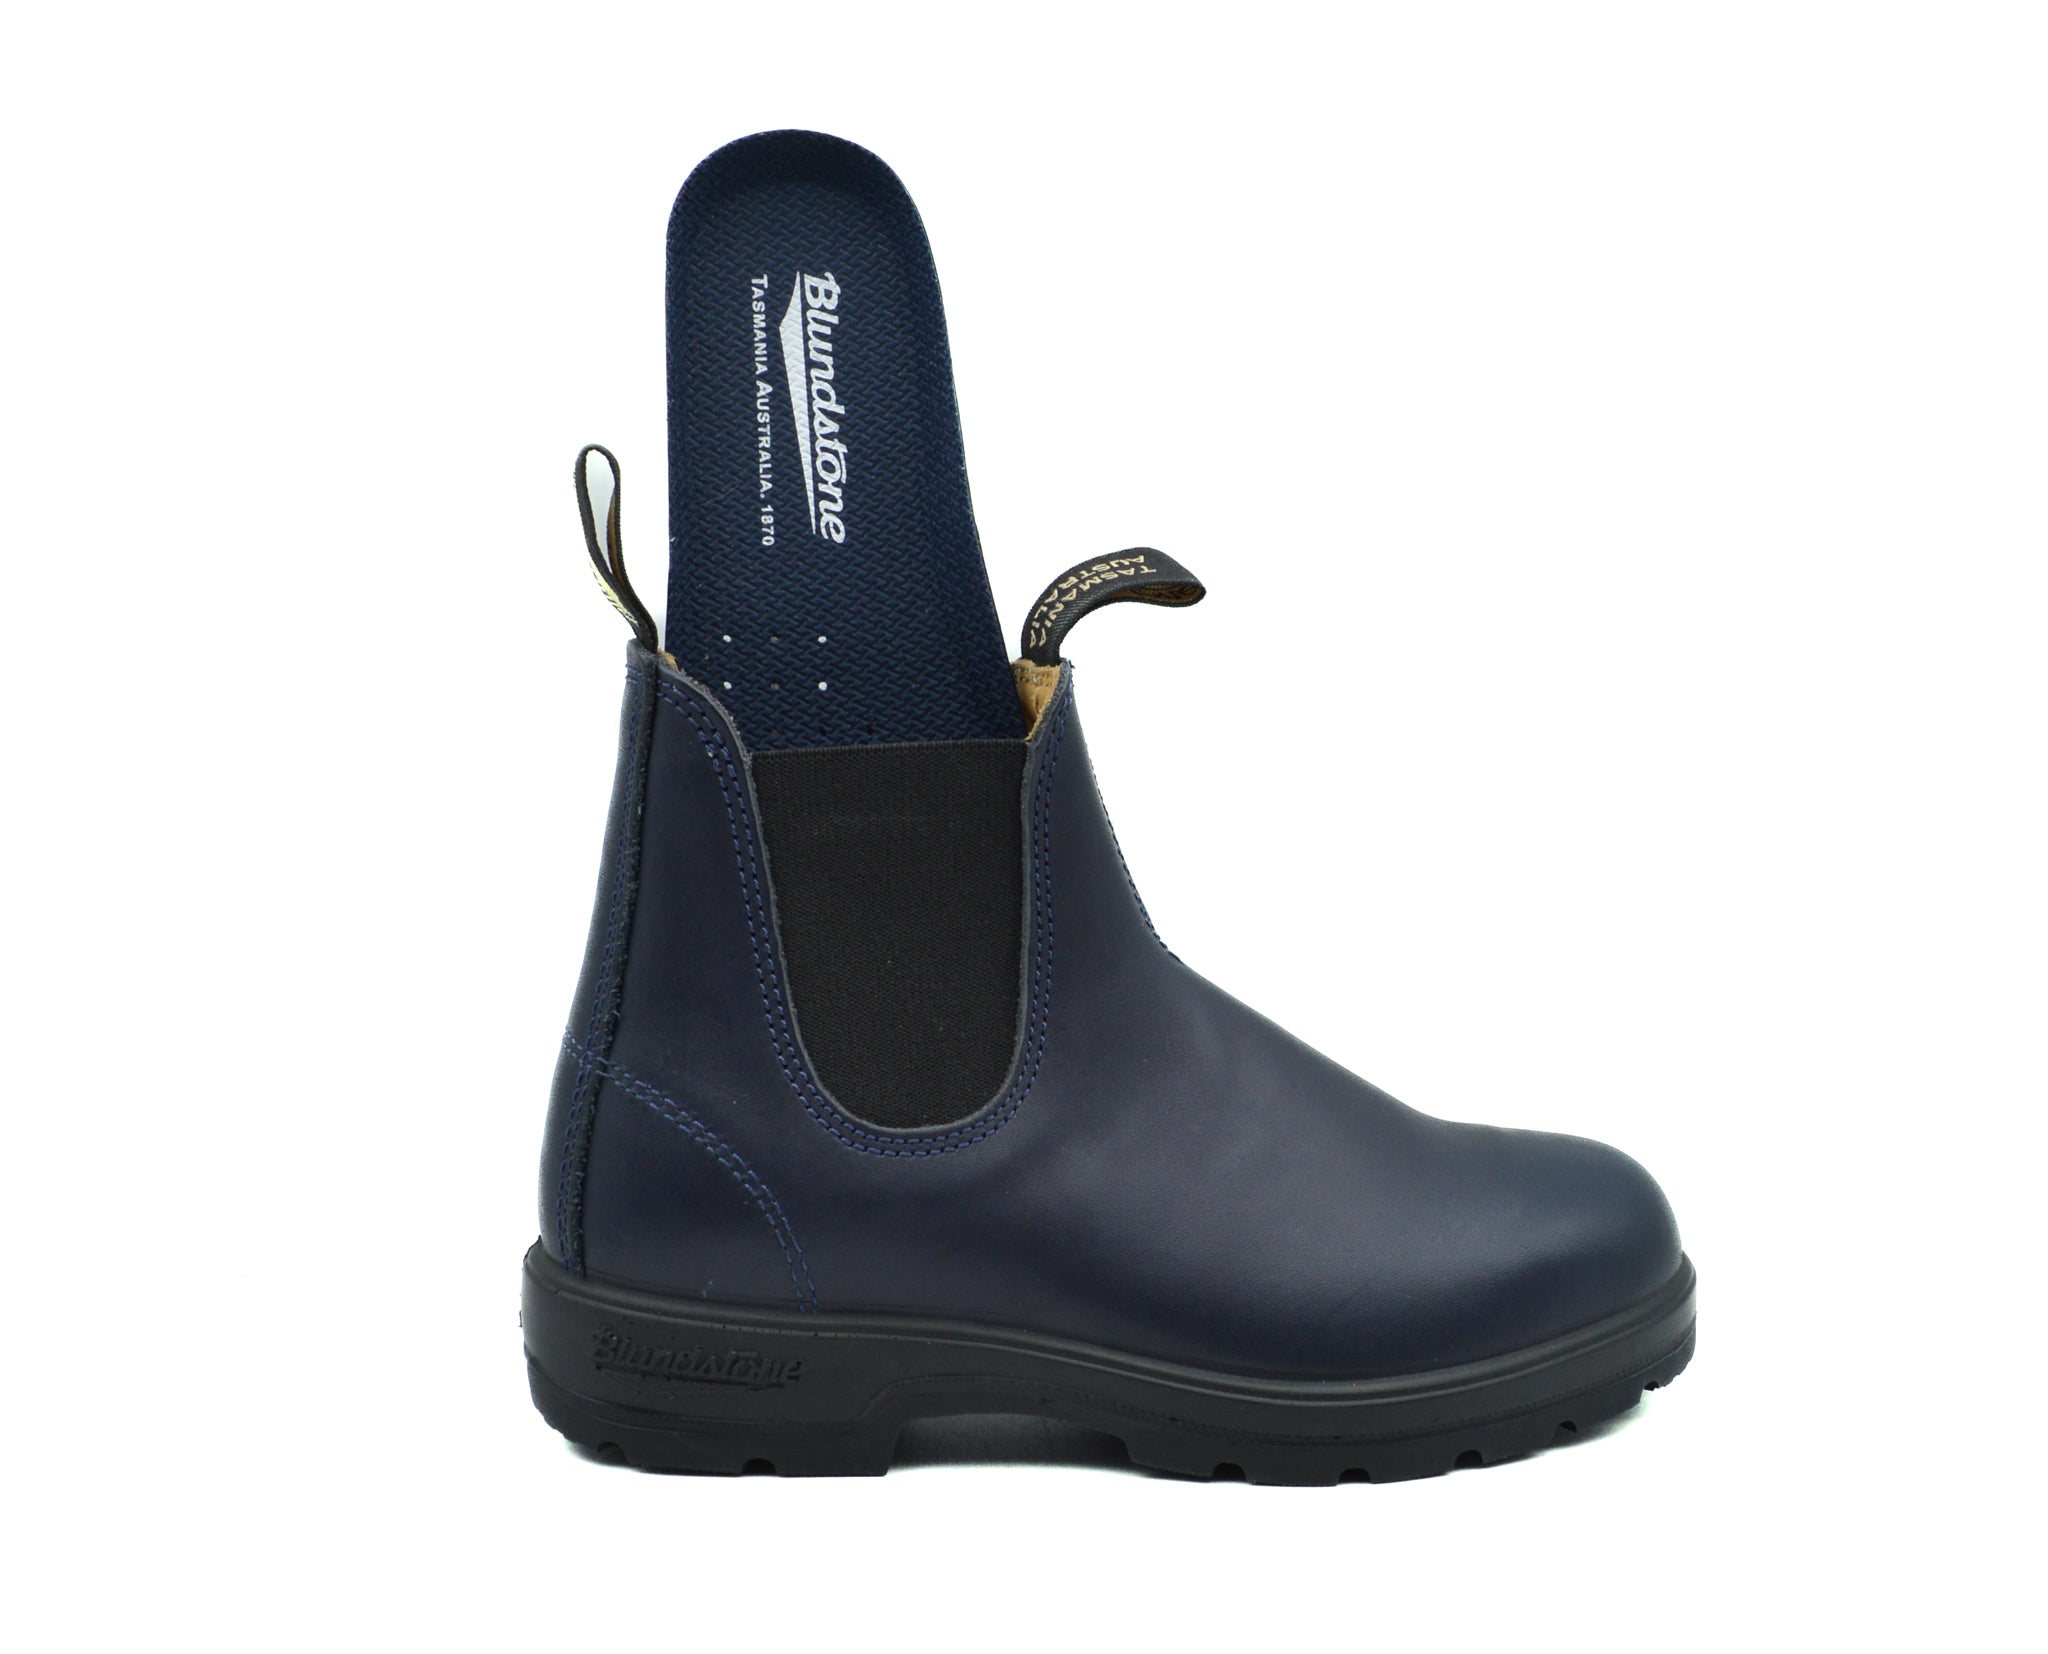 BLUNDSTONE Classic Chelsea boots 2246 Navy